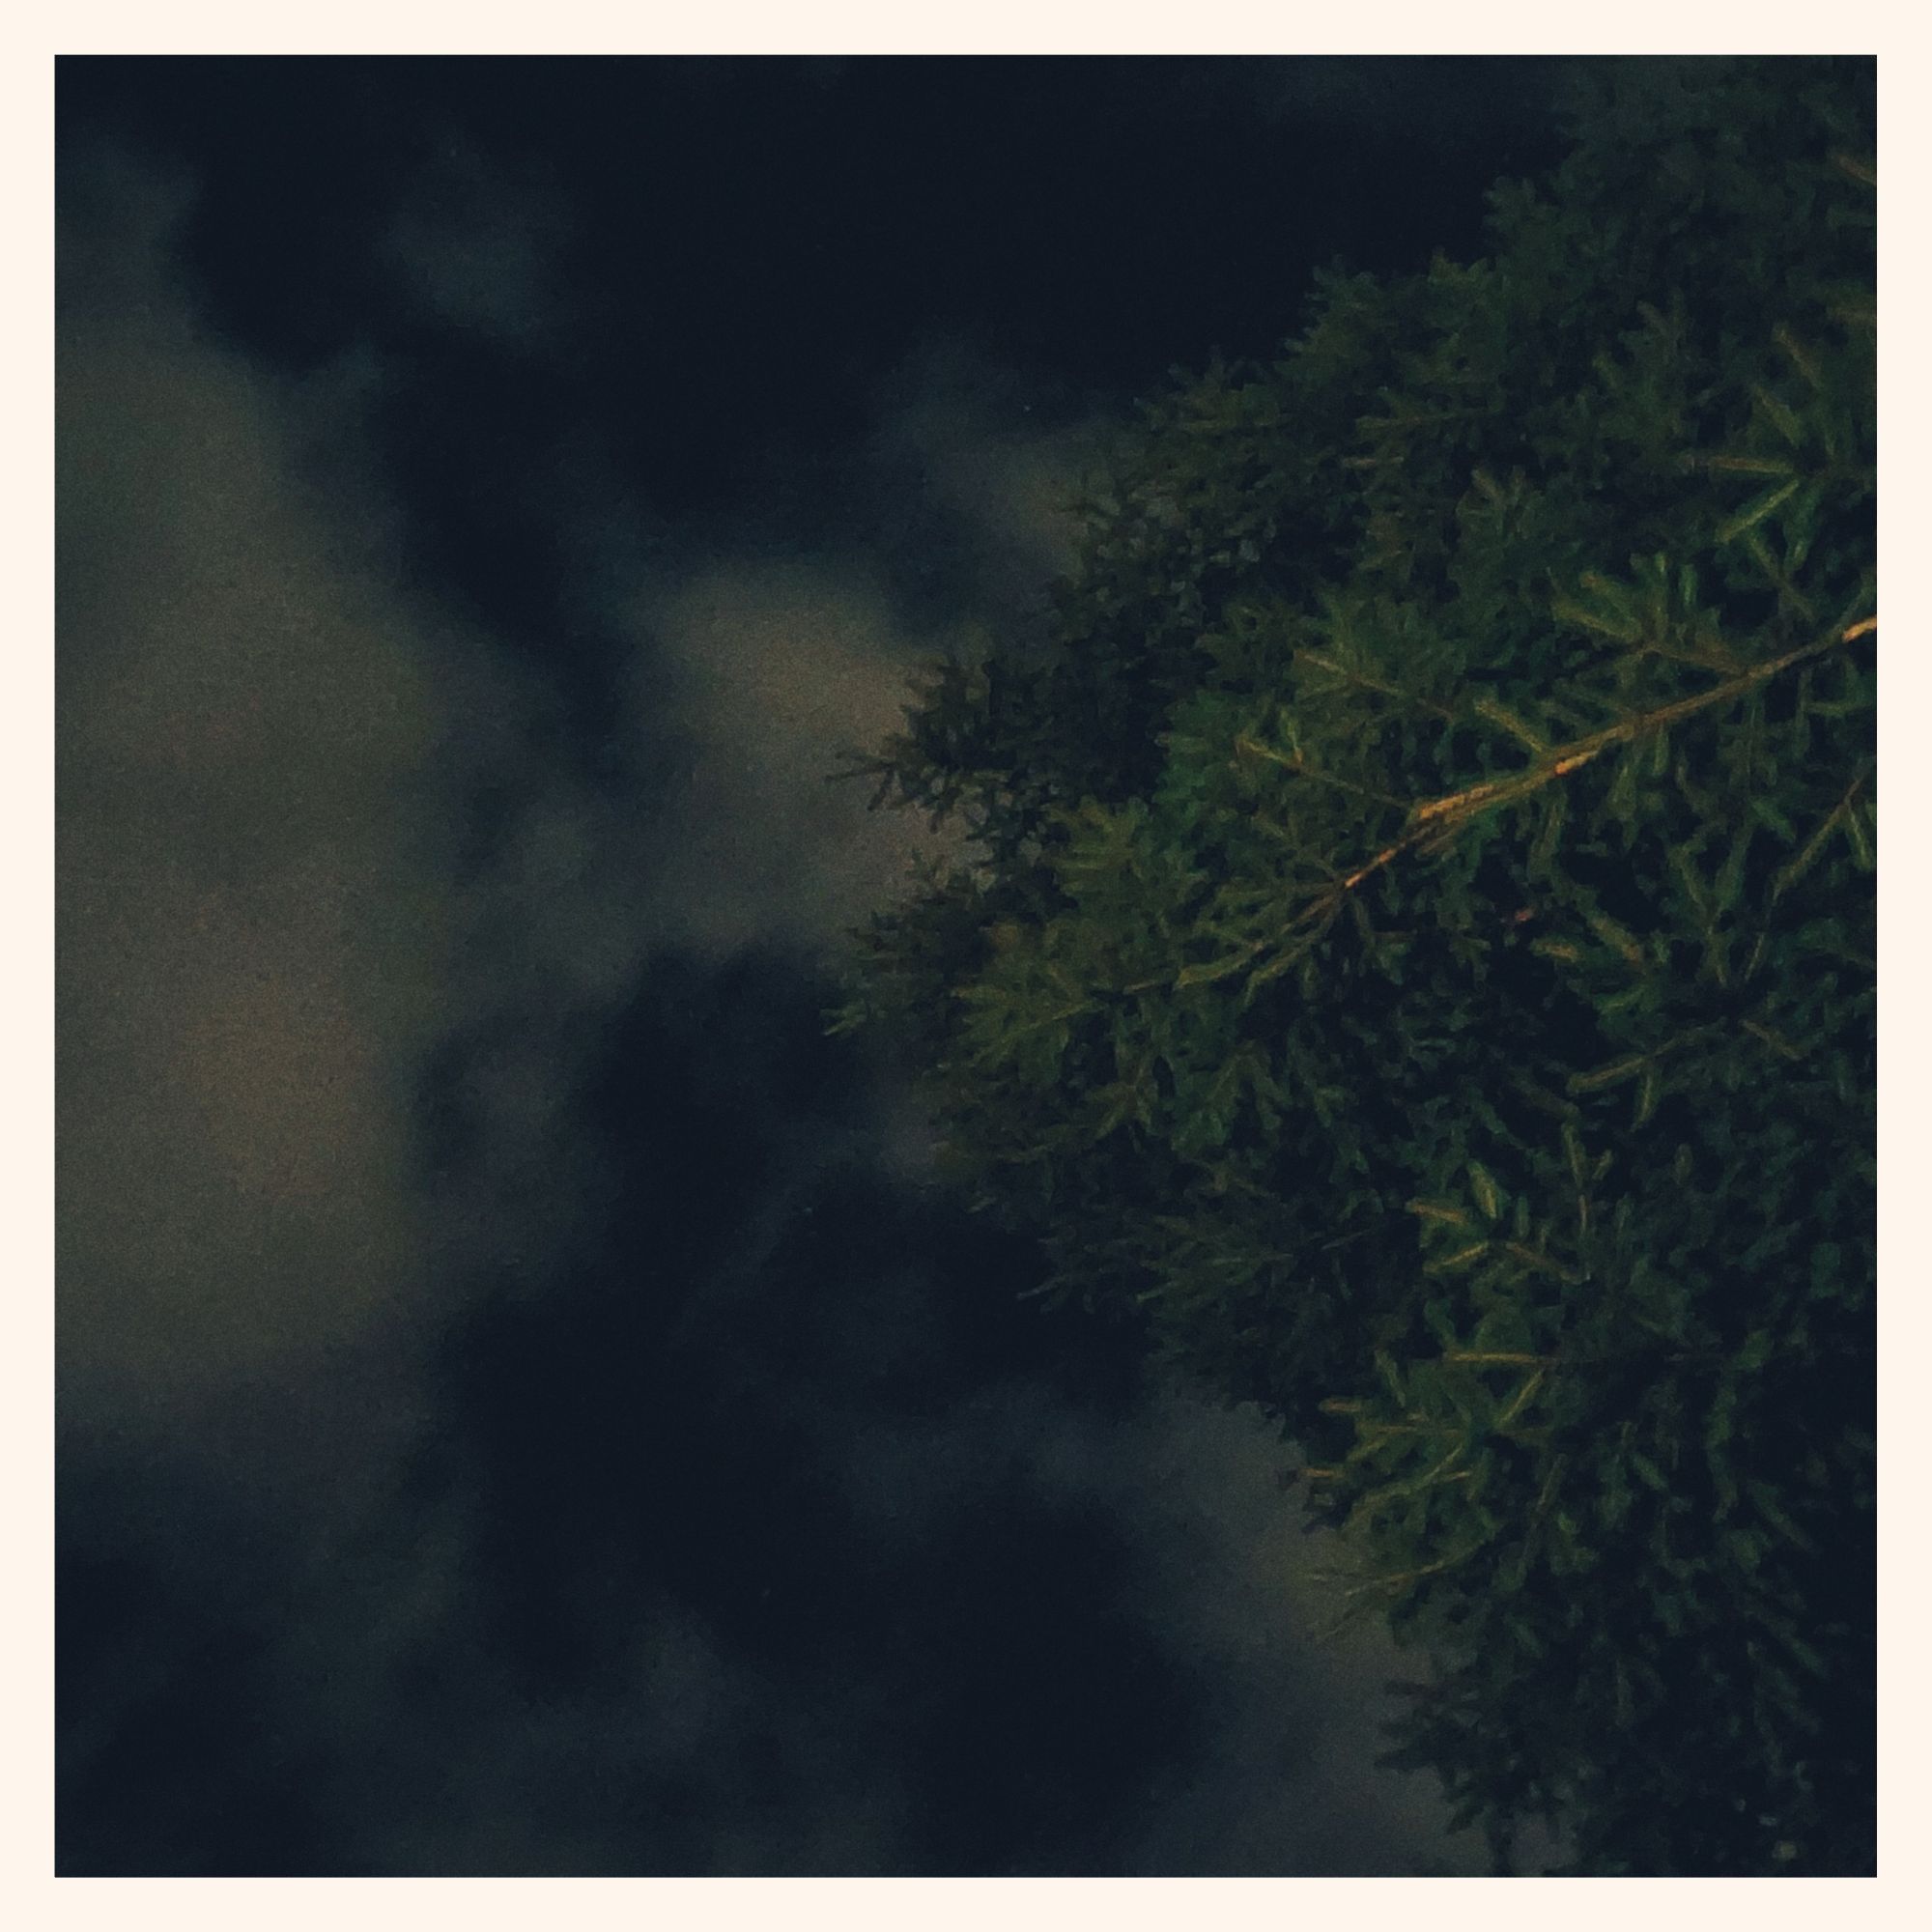 Nightsky. White clouds. And a fir tree.